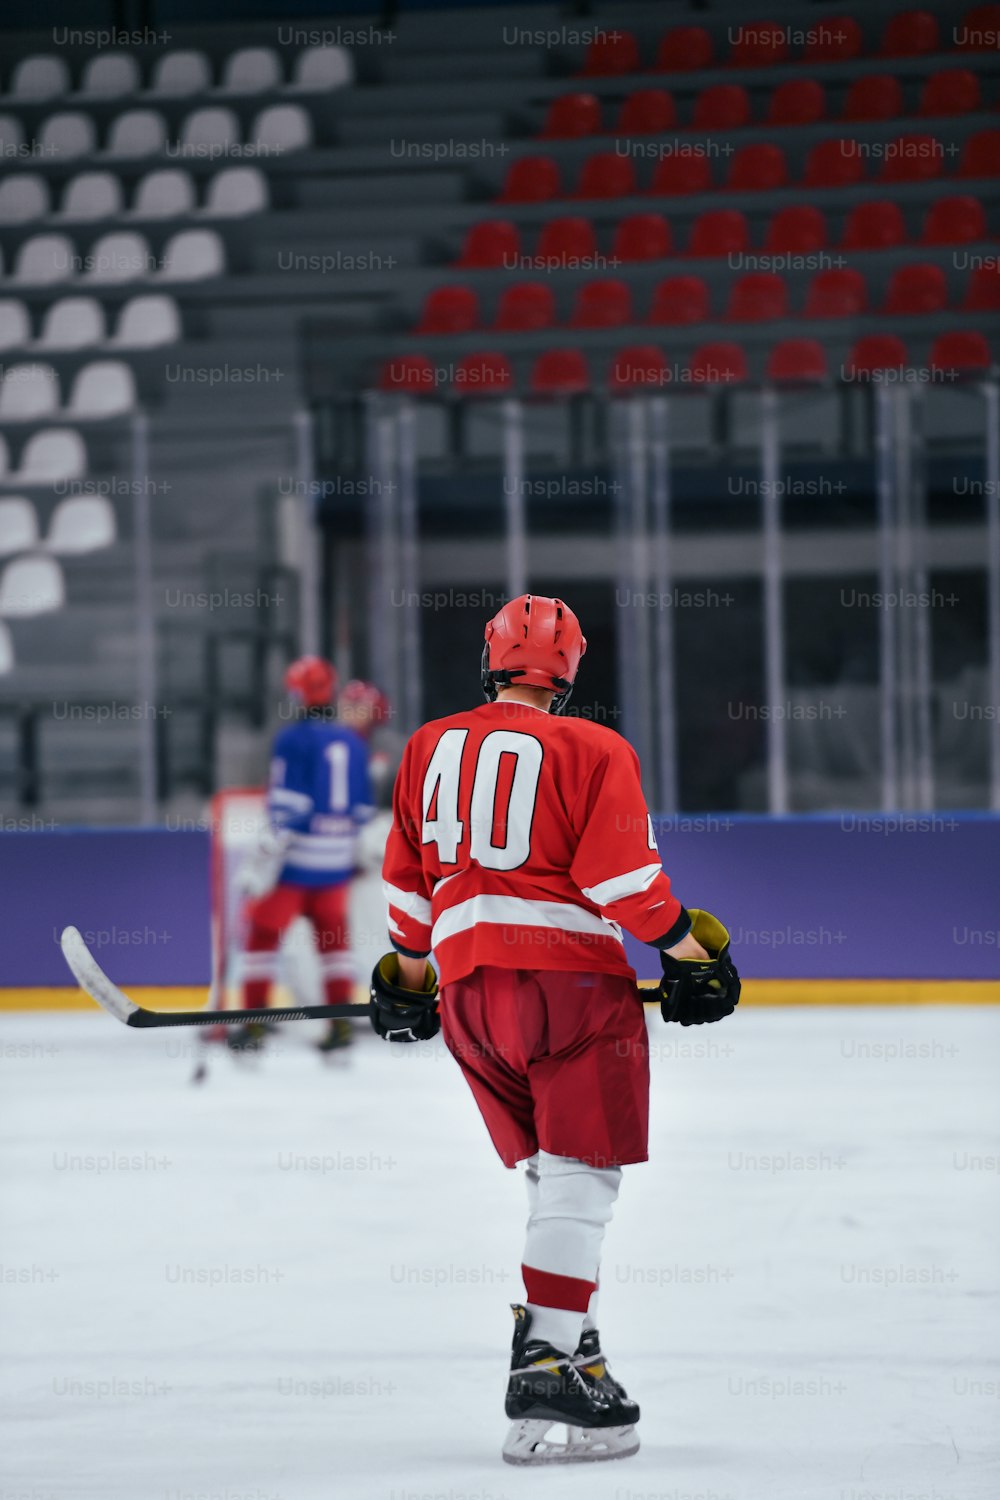 a hockey player in a red uniform on the ice